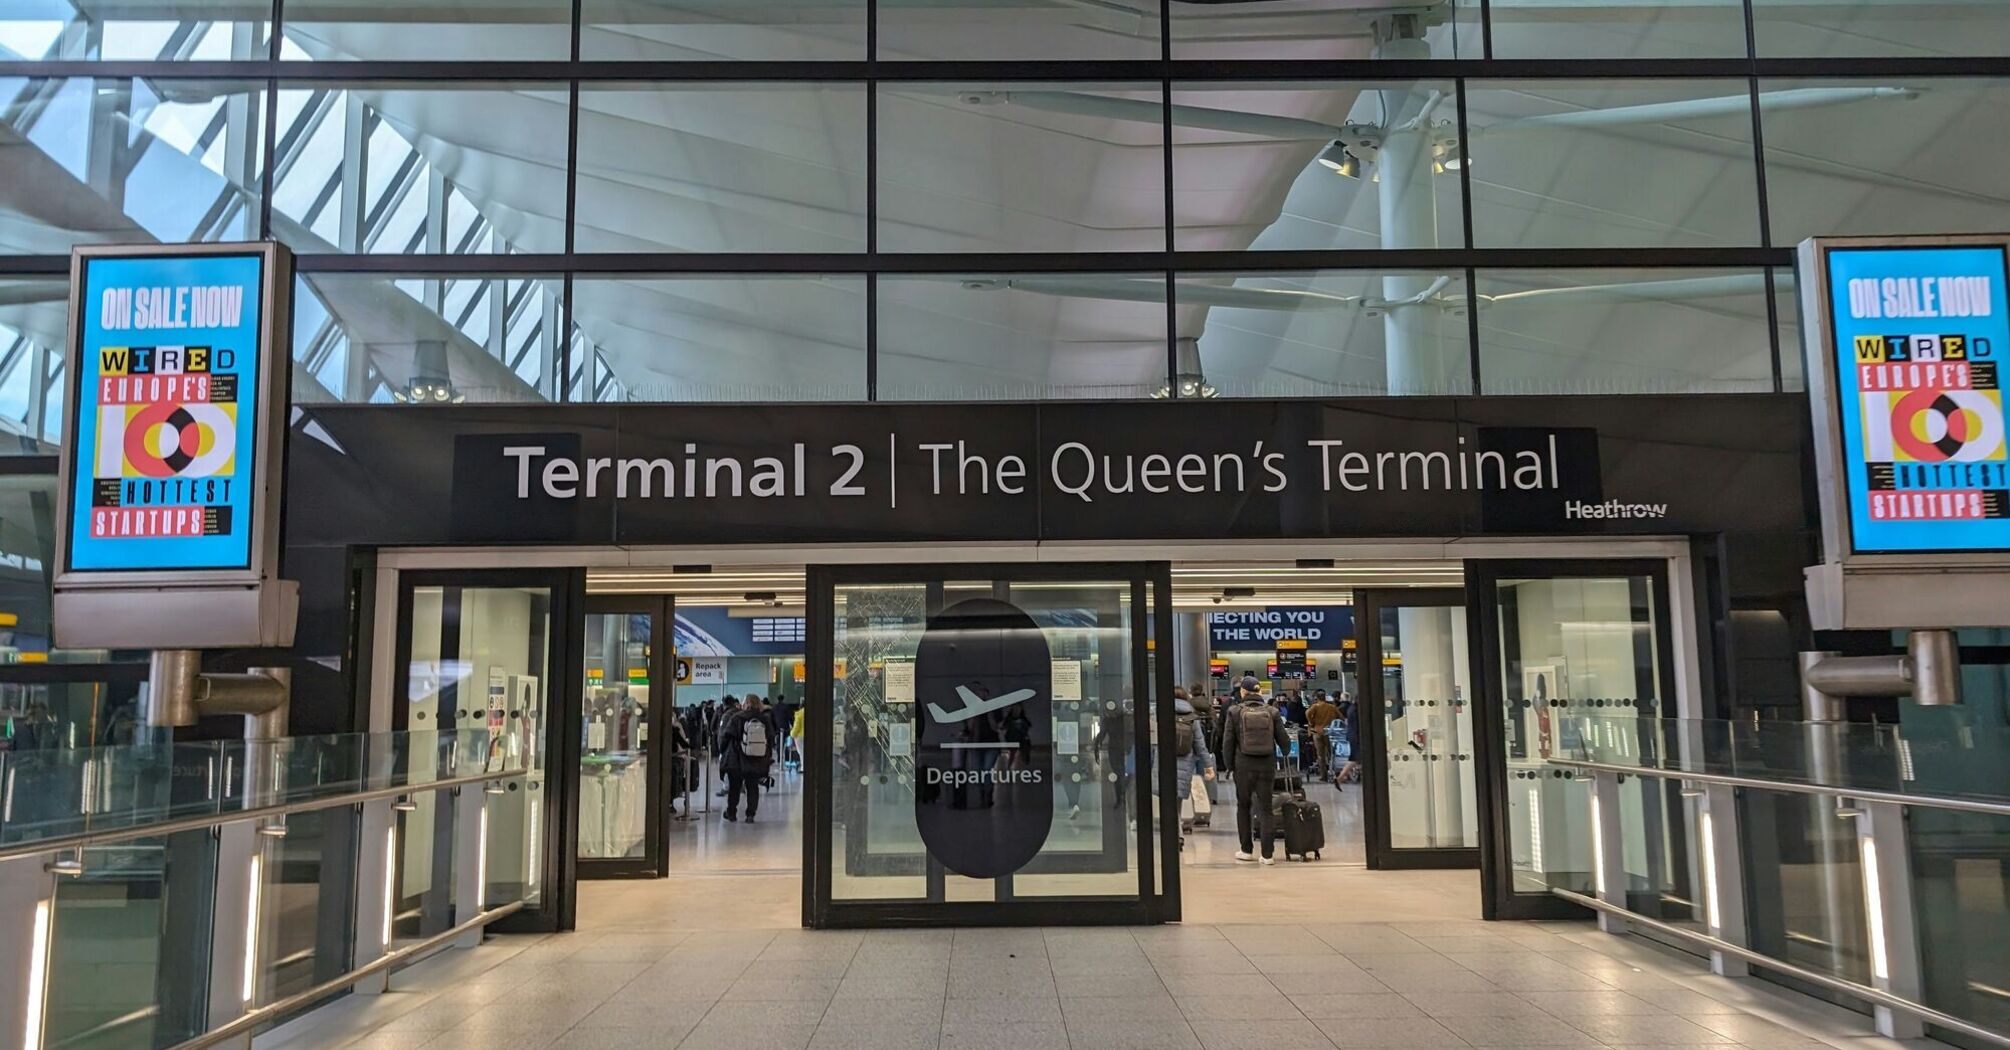 The entrance to terminal 2 of the queens terminal